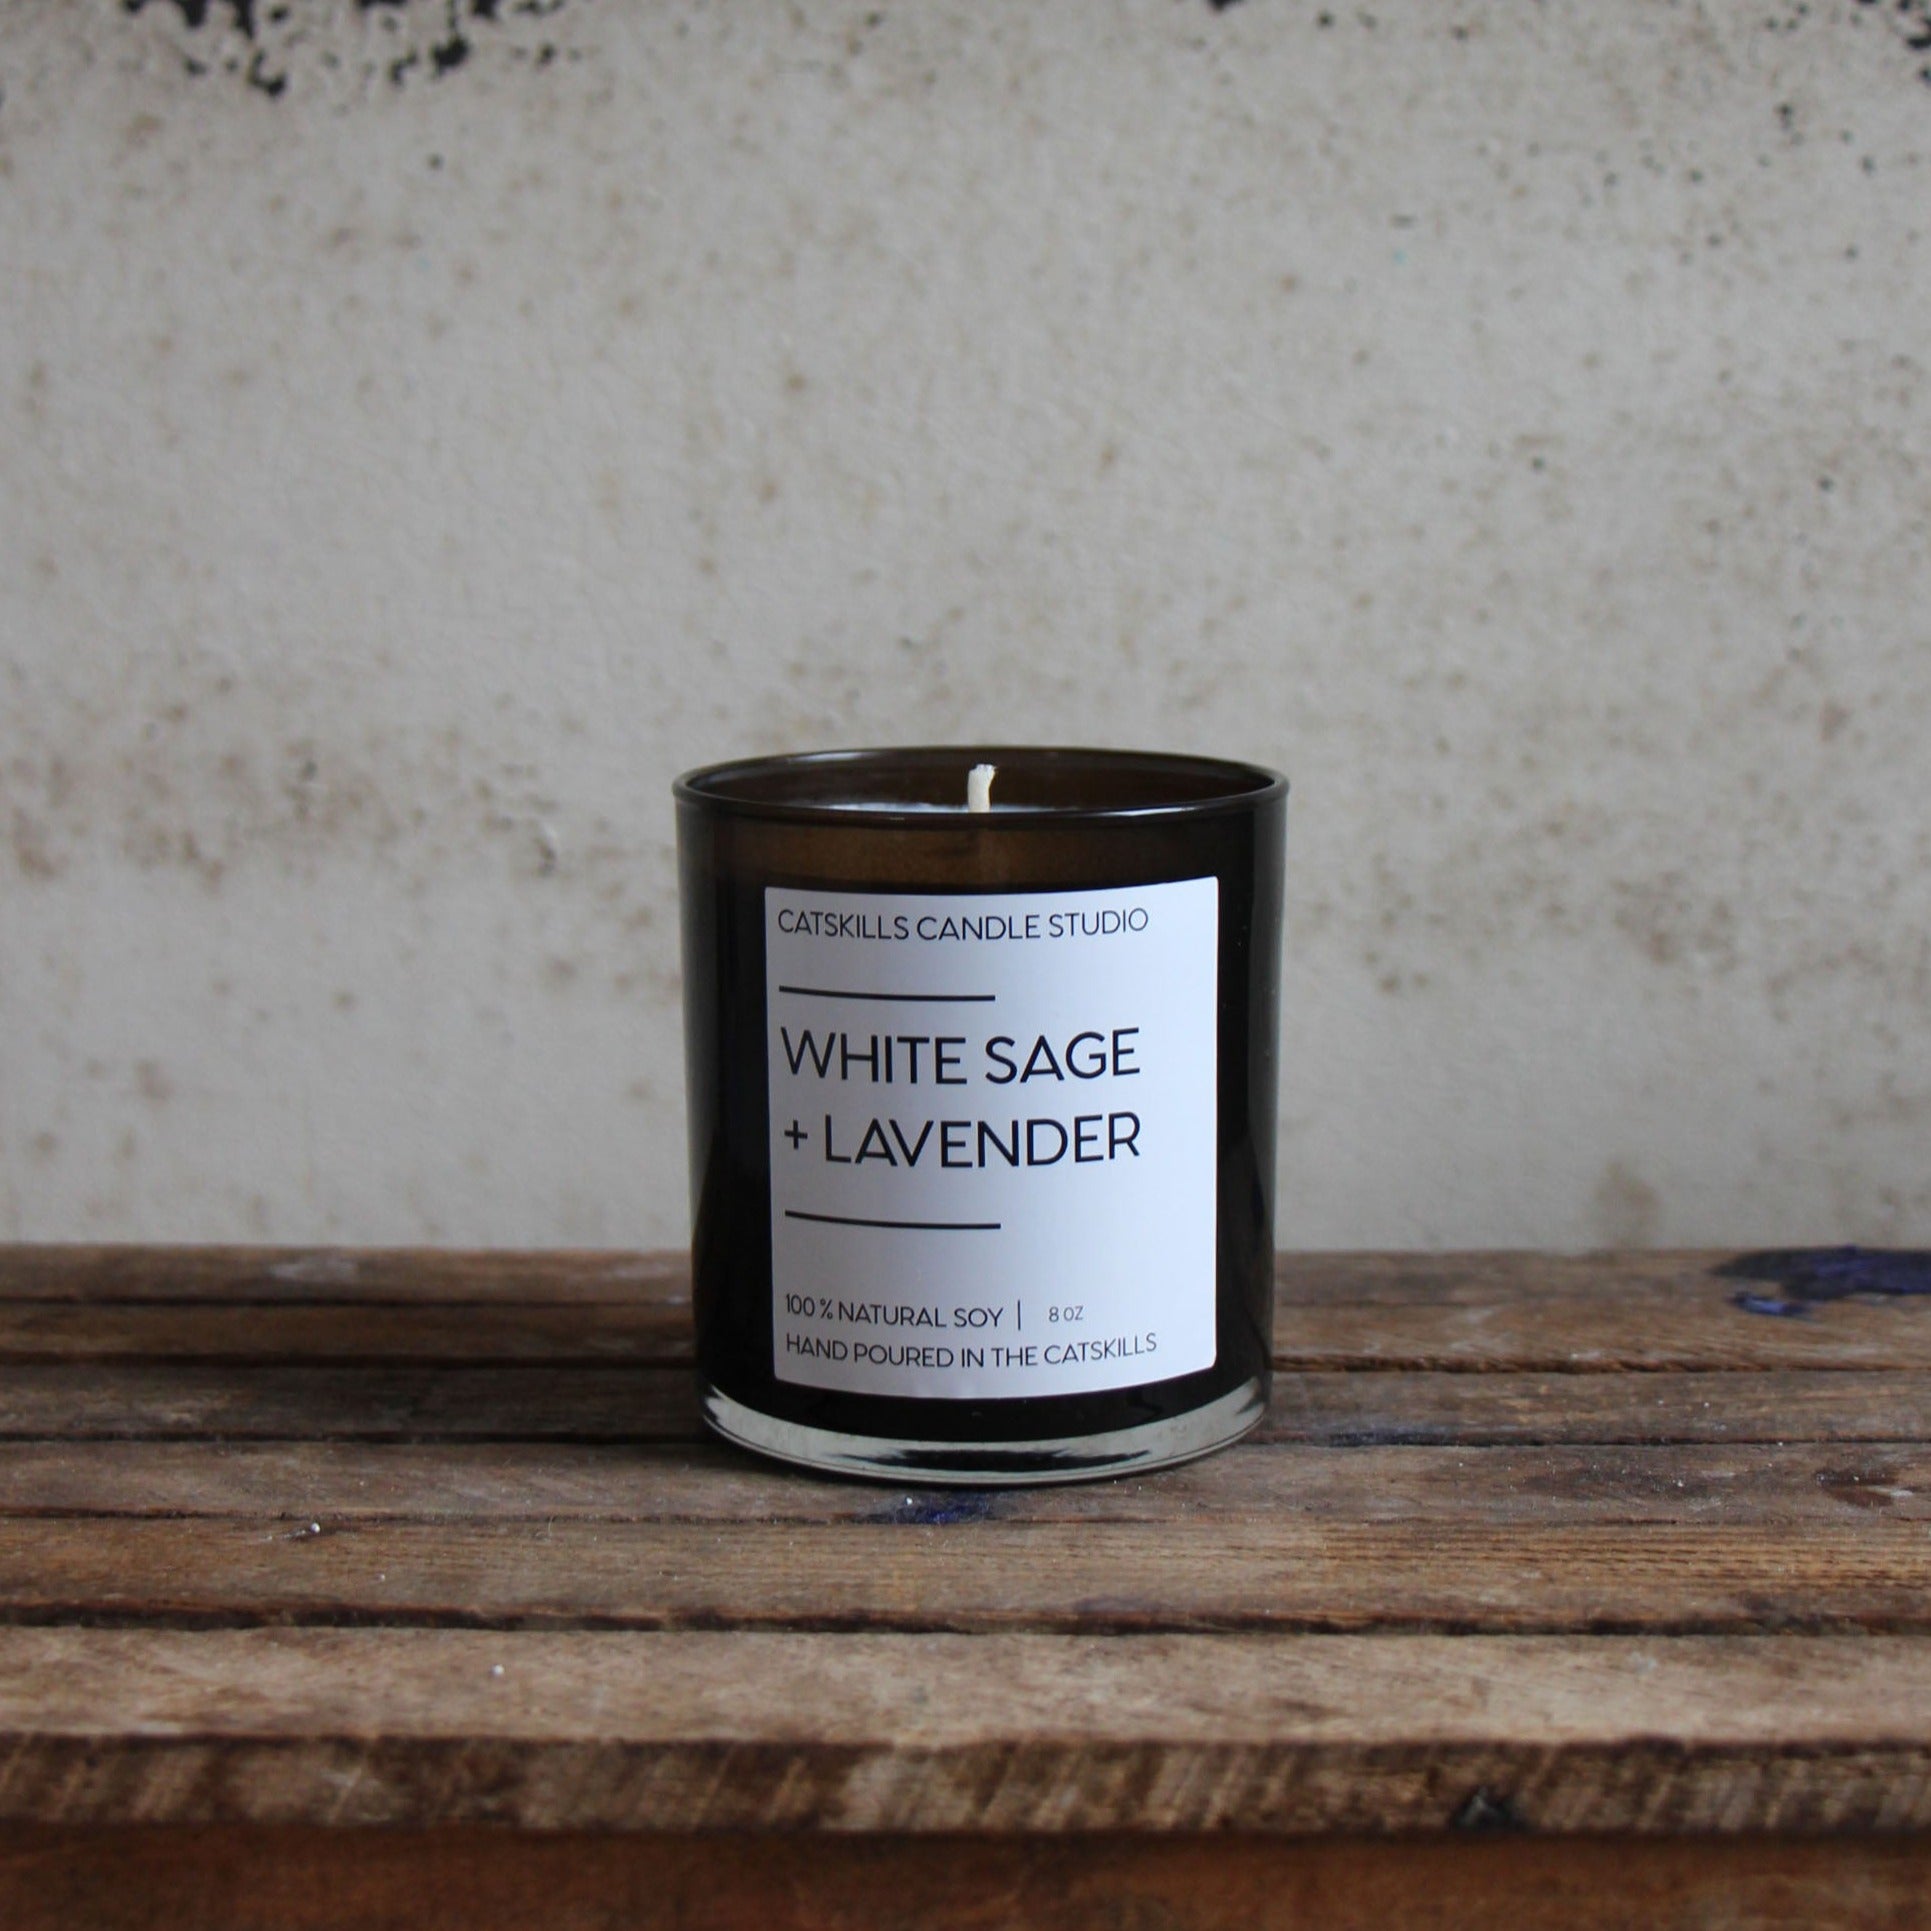 9-ounce hand-poured jar candle with lid made of natural soy and scents of lavender, sage, cedar, and sandalwood